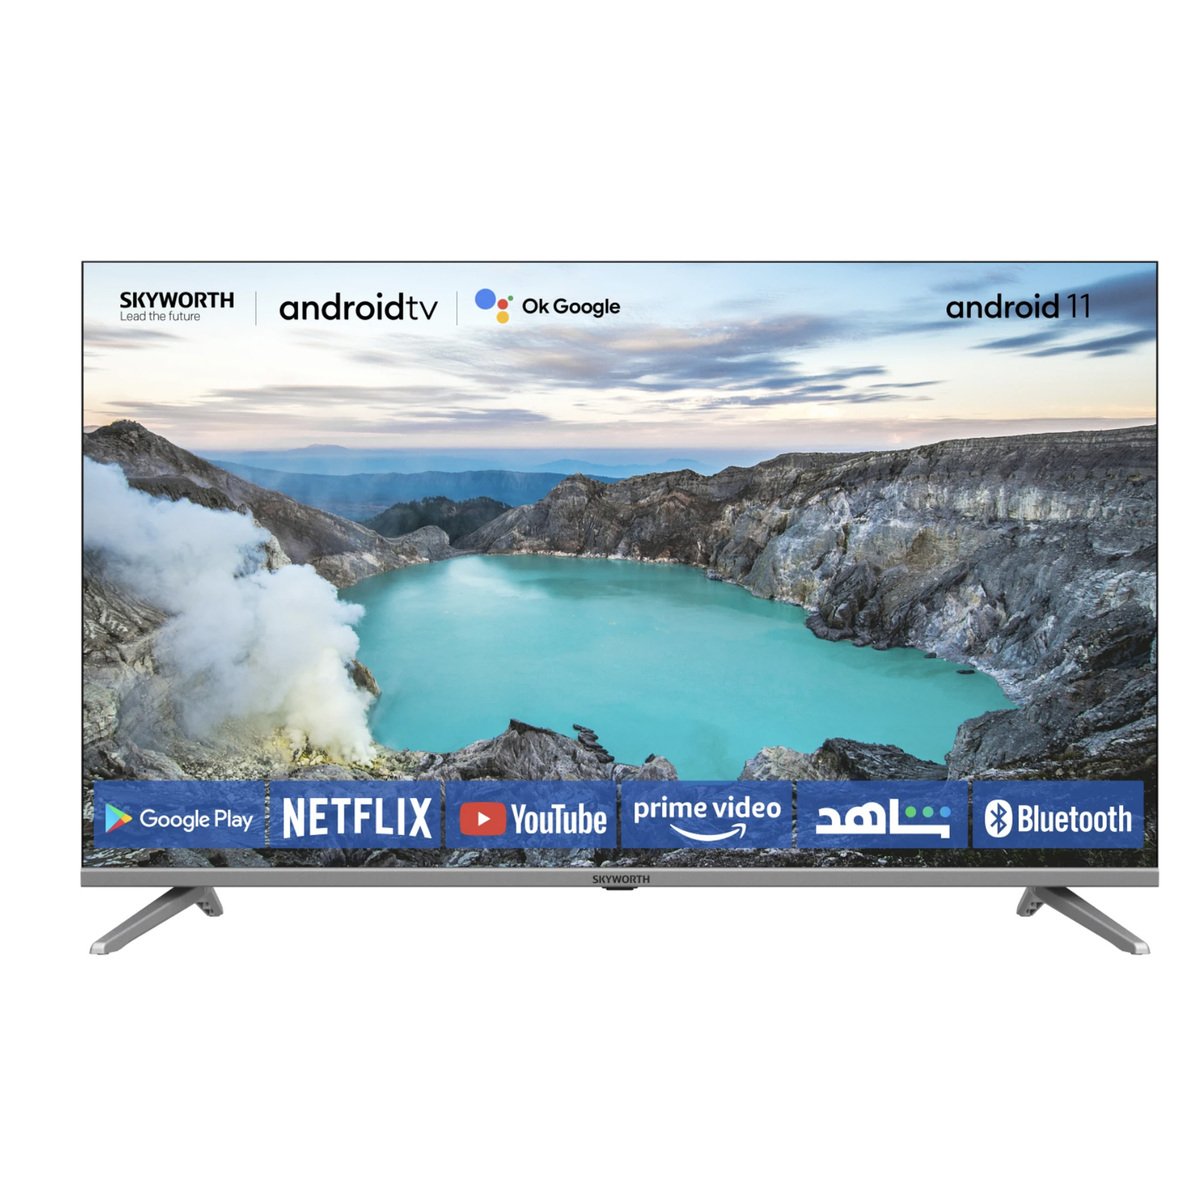 Skyworth Android Smart LED TV STD6500 32” Online at Best Price, 32-43  Inches